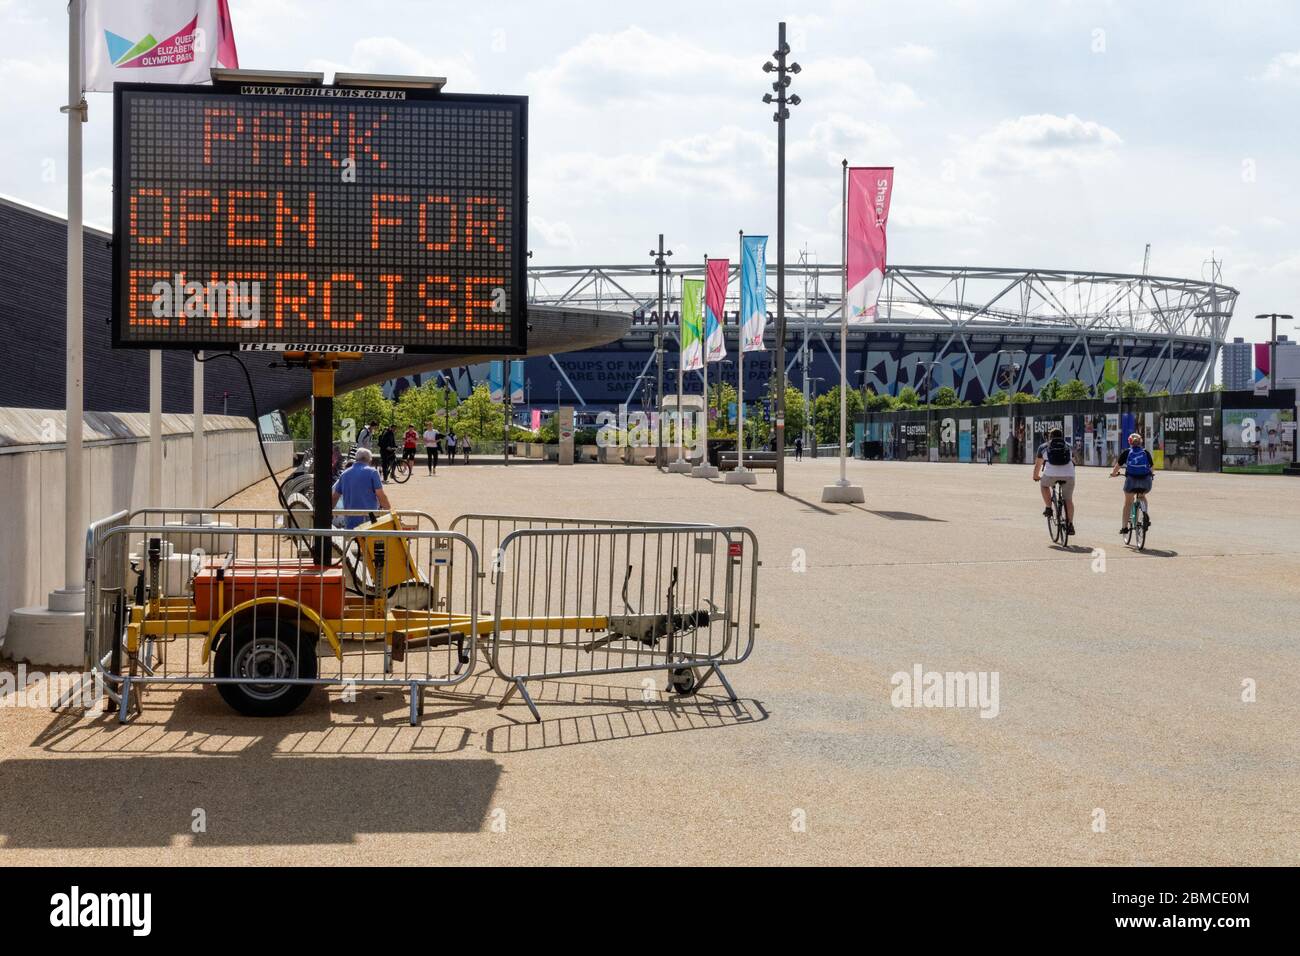 Information board in the Queen Elizabeth Olympic Park reminding people about the coronavirus lockdown rules. London, England United Kingdom UK Stock Photo